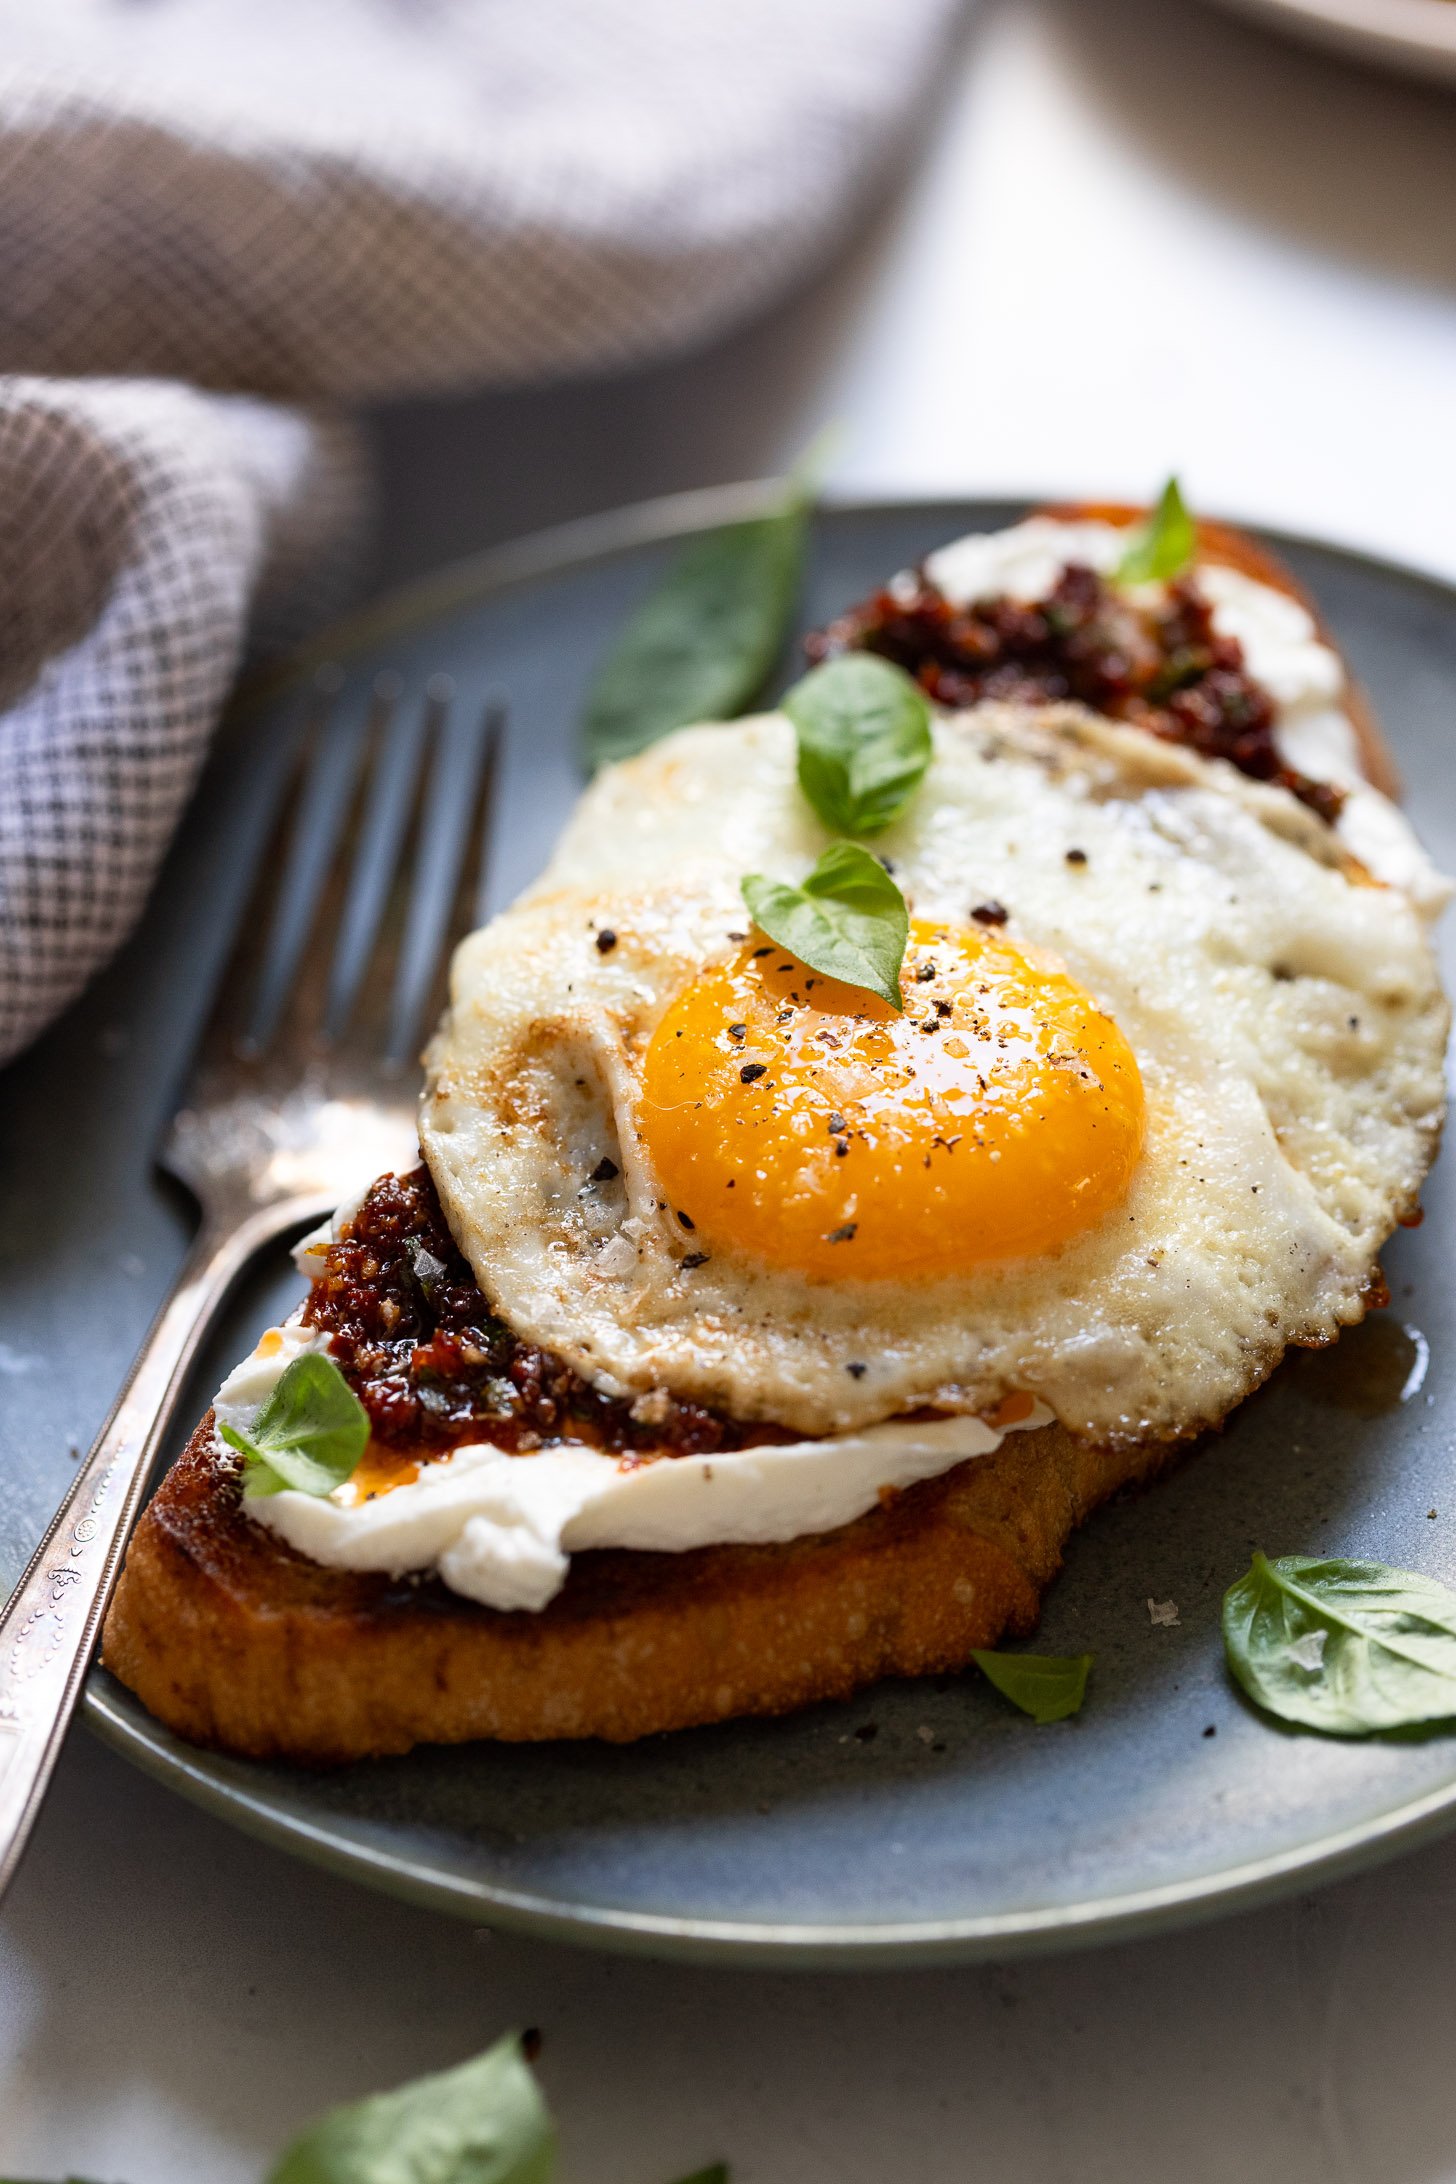 Plate with goat cheese toast topped with fried egg and basil leaves.